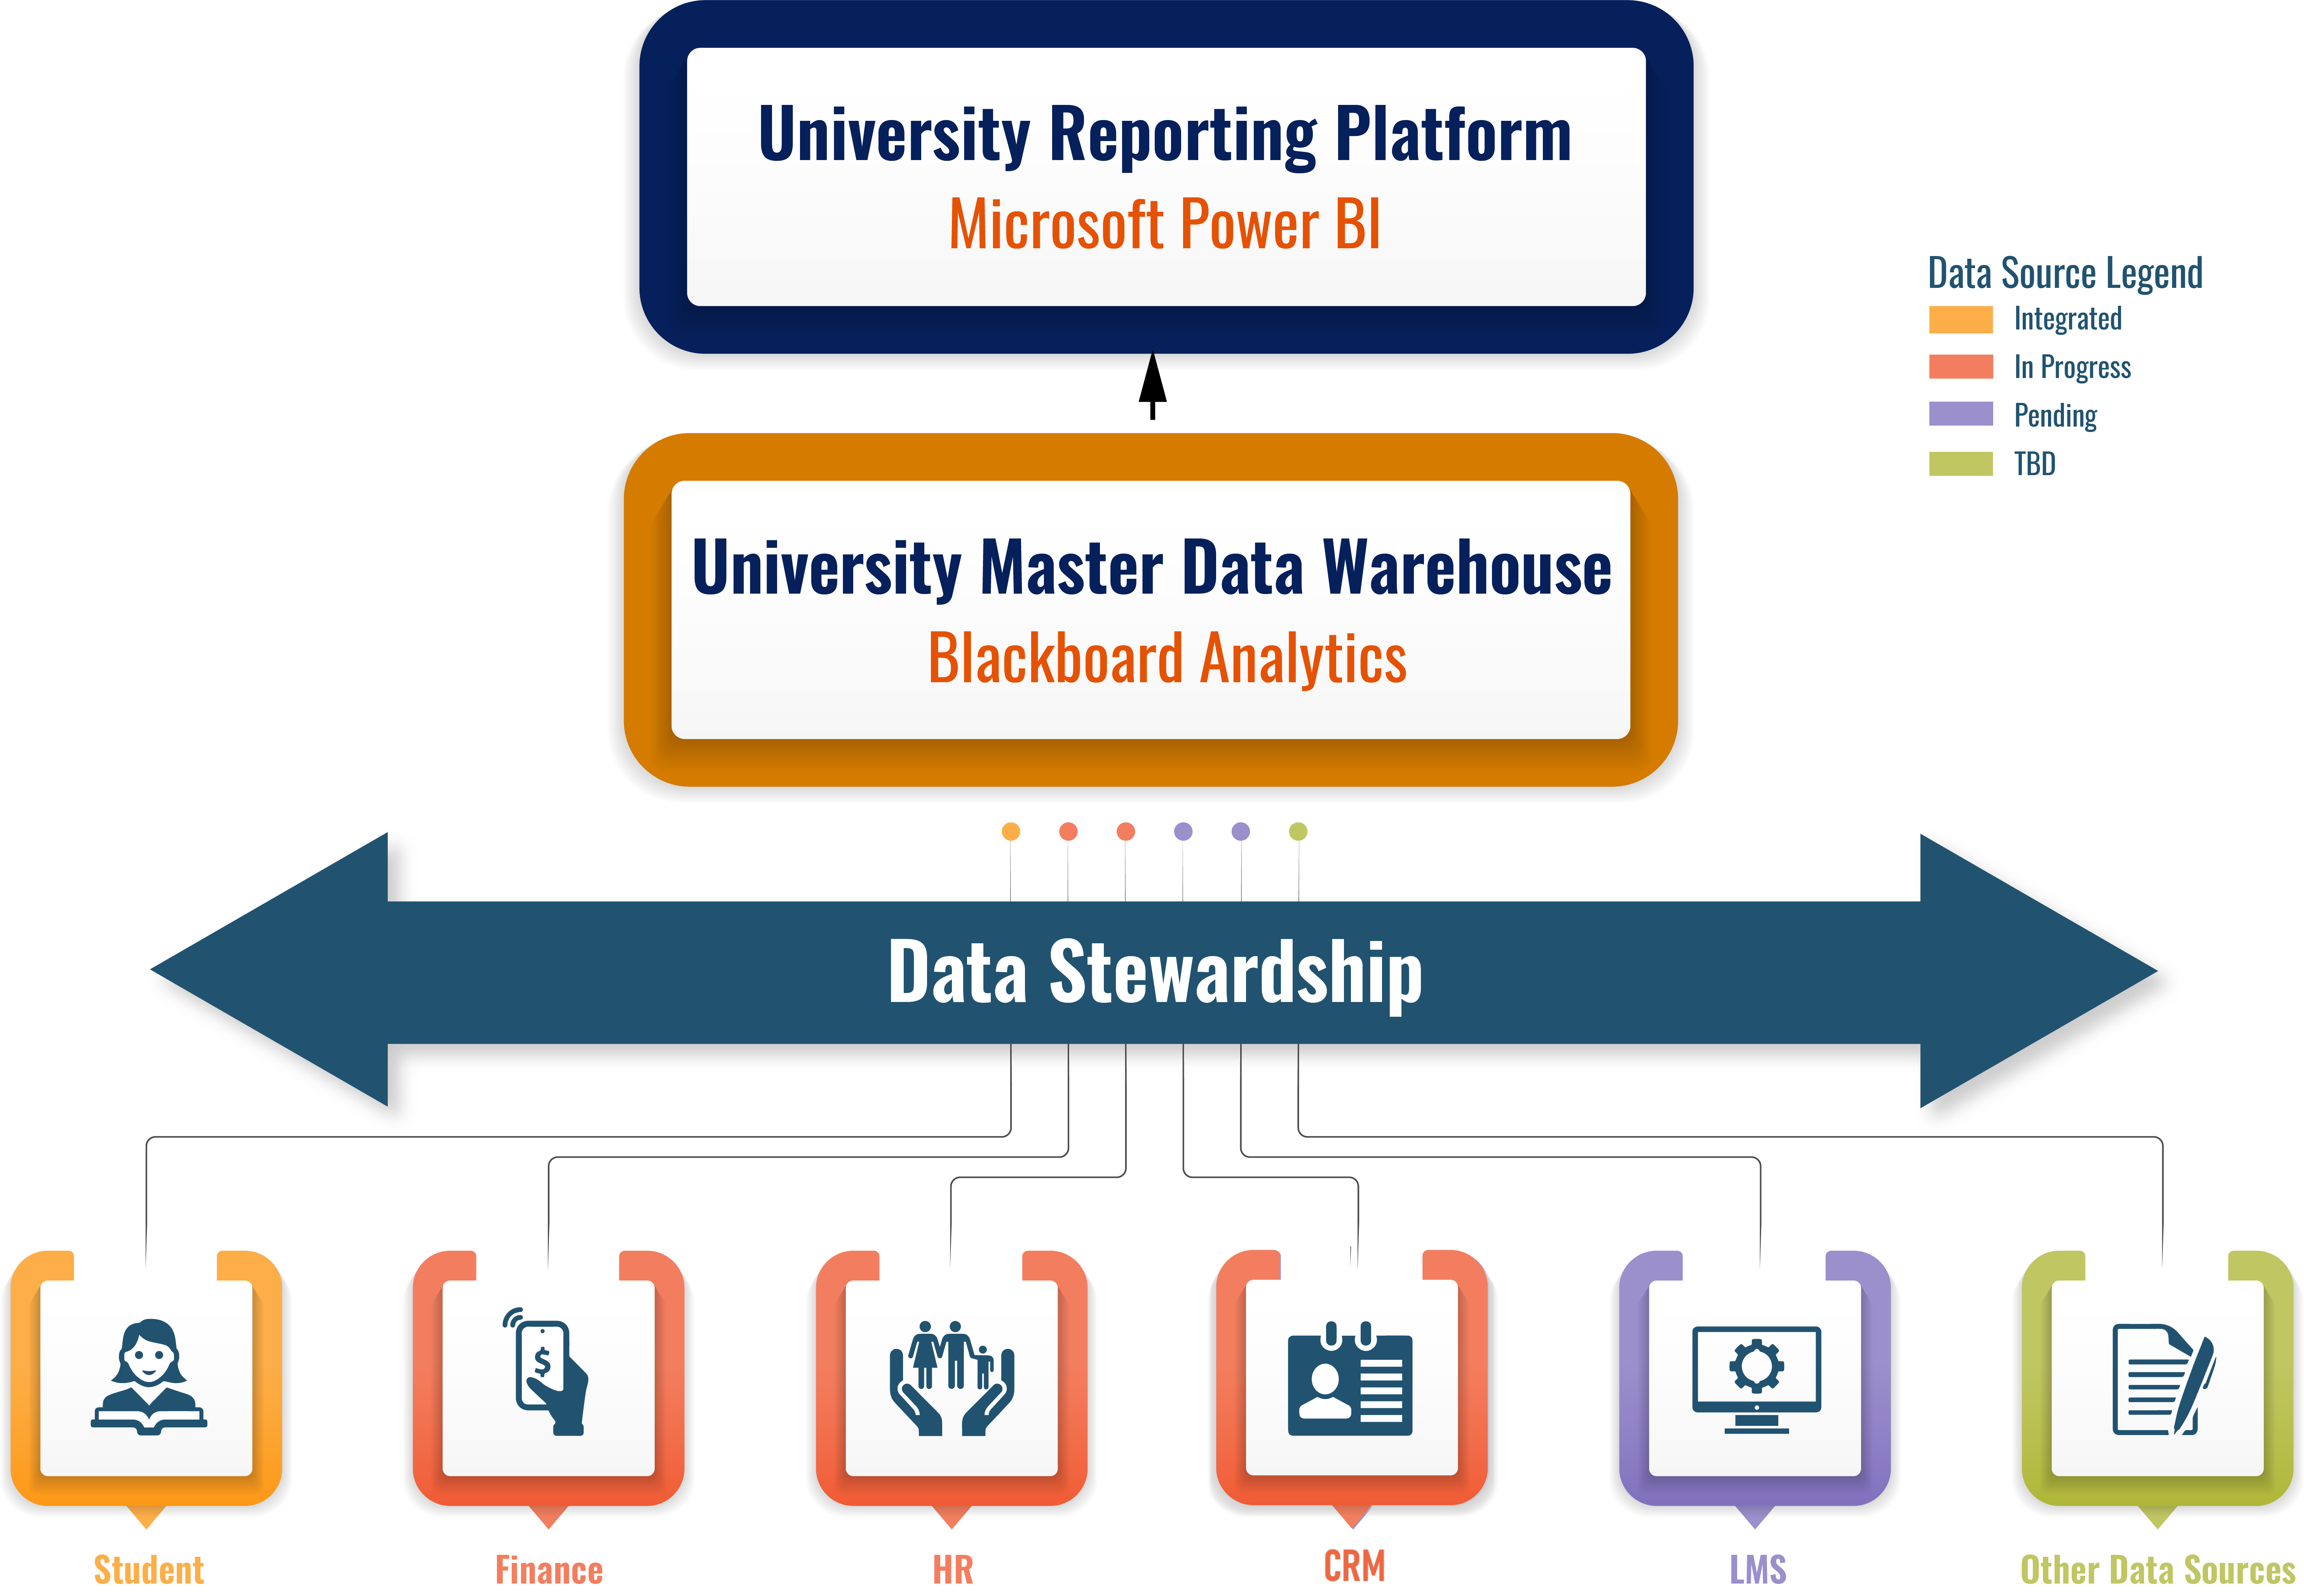 The University's data workflow includes data stewardship of critical data systems, like Student, Finance, HR, CRM, LMS, and other data sources. These sources feed into the University Master Data Warehouse powered by our analytics platform. From there, we can provide reports for University leadership through our reporting platform. Several sources are already integrated, like our Student system, while others are in-progress (Finance and HR), pending (CRM and LMS), or to be determined (other data sources).